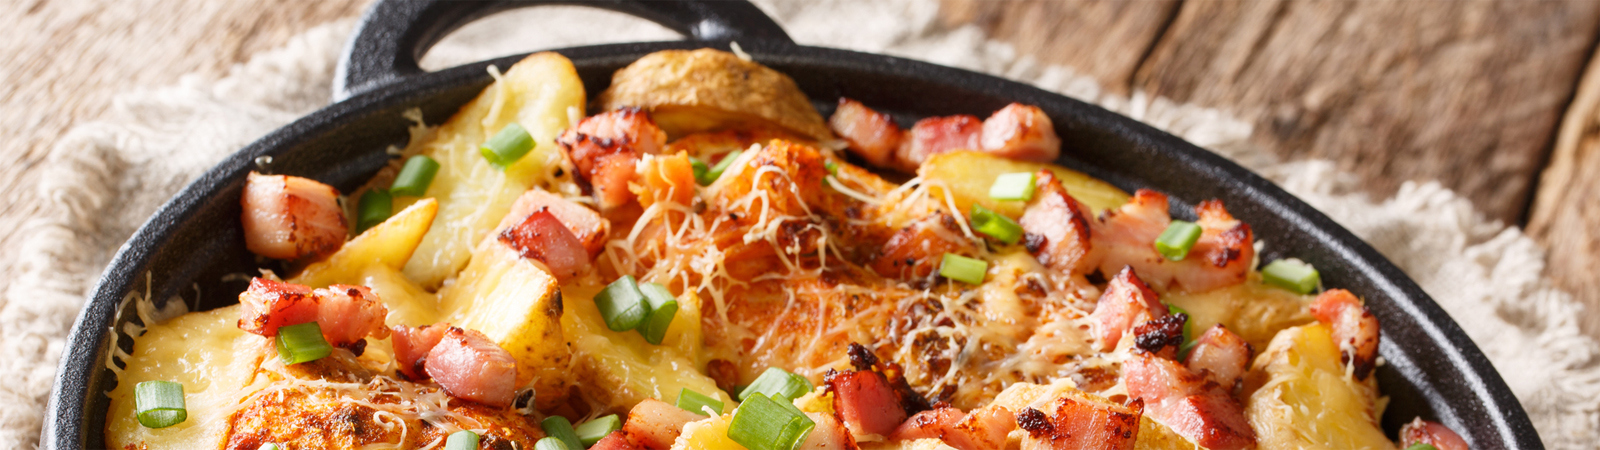 skillet with potatoes and cheese topping